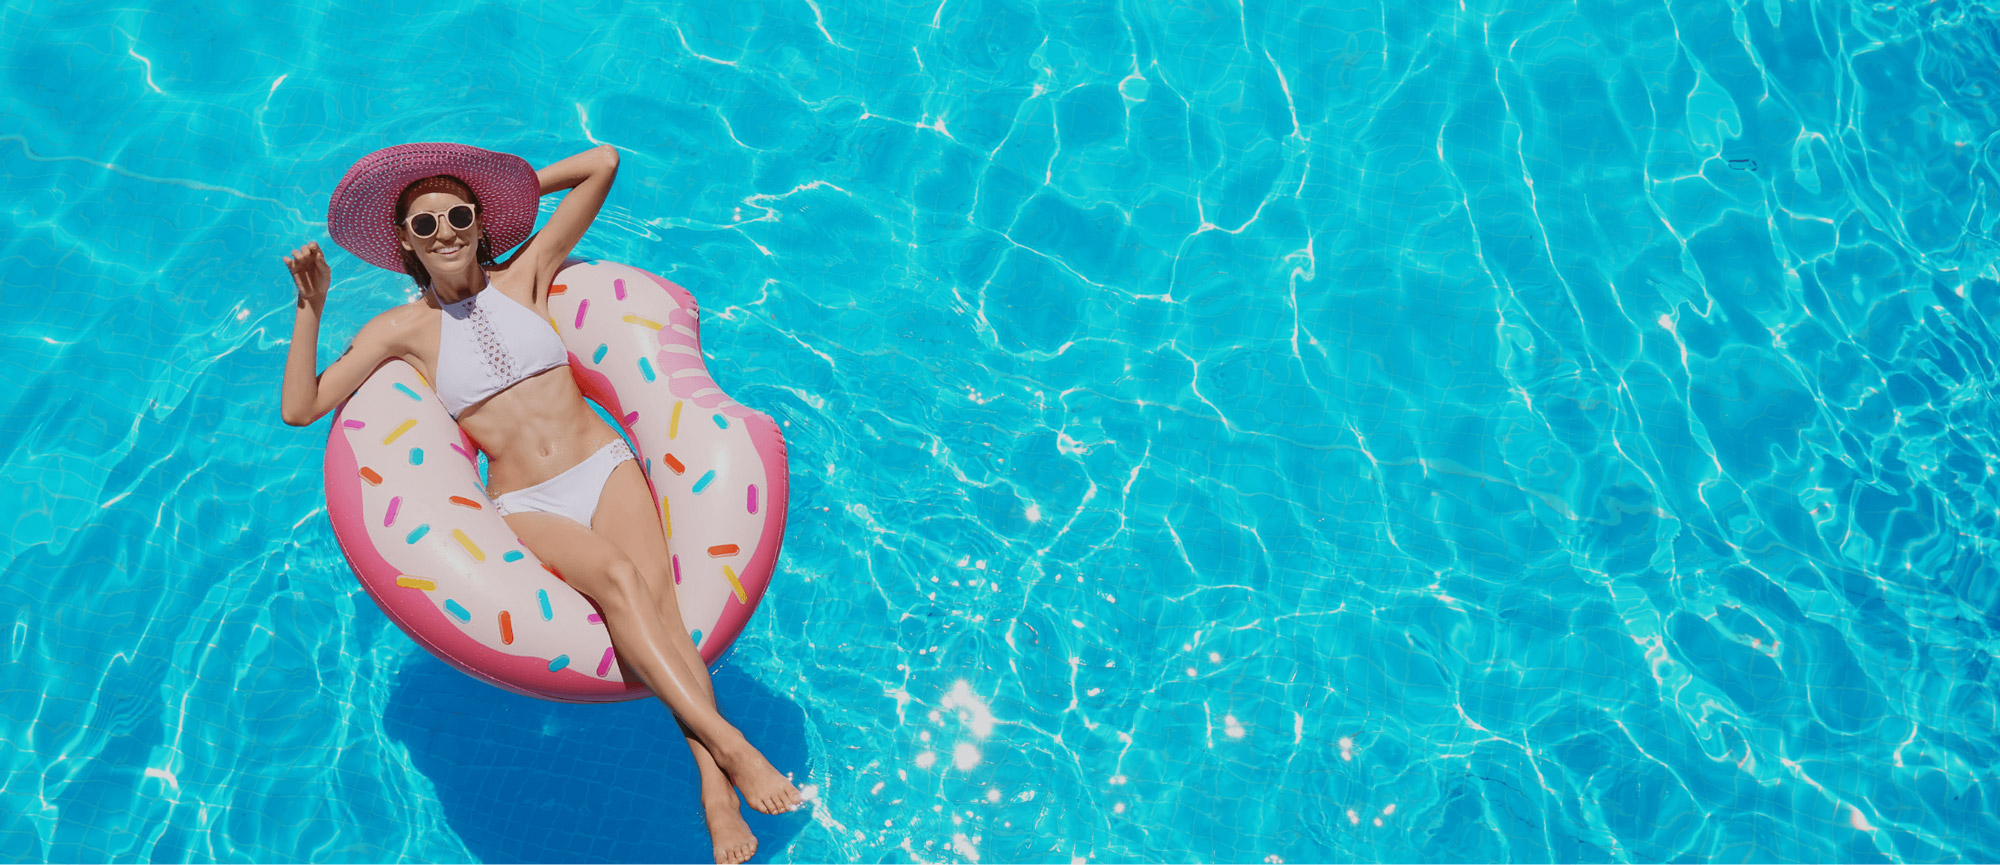 It’s time to prep your pool for Summer!